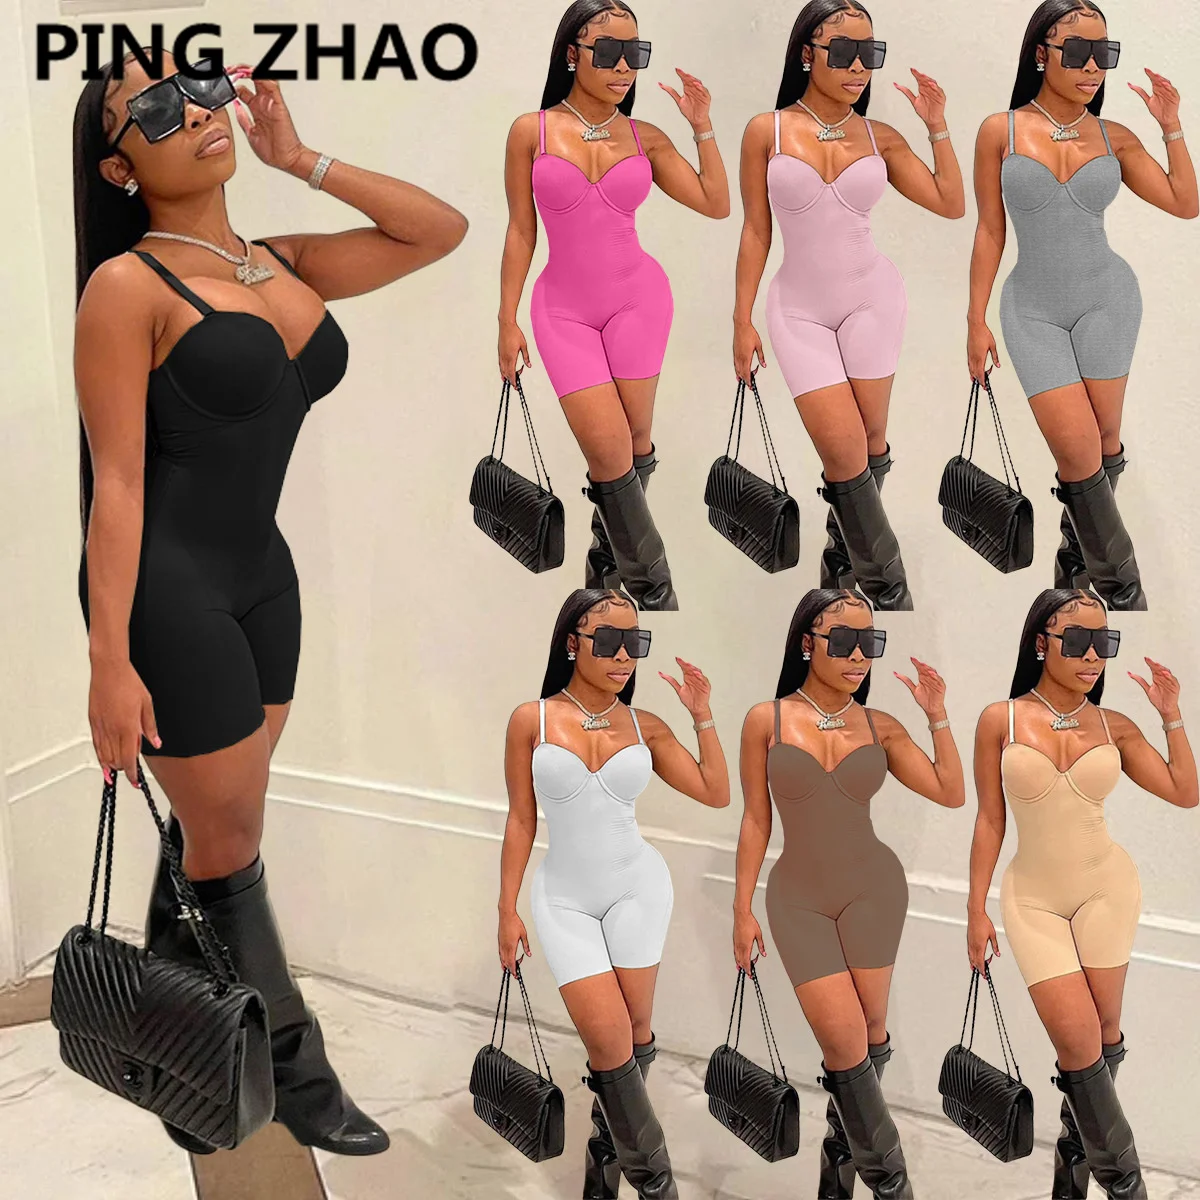 

PING ZHAO Women Playsuits Solid Strap Bodycon Rompers Cleavage Sexy Fashion One Piece Overalls Stylish Outfits